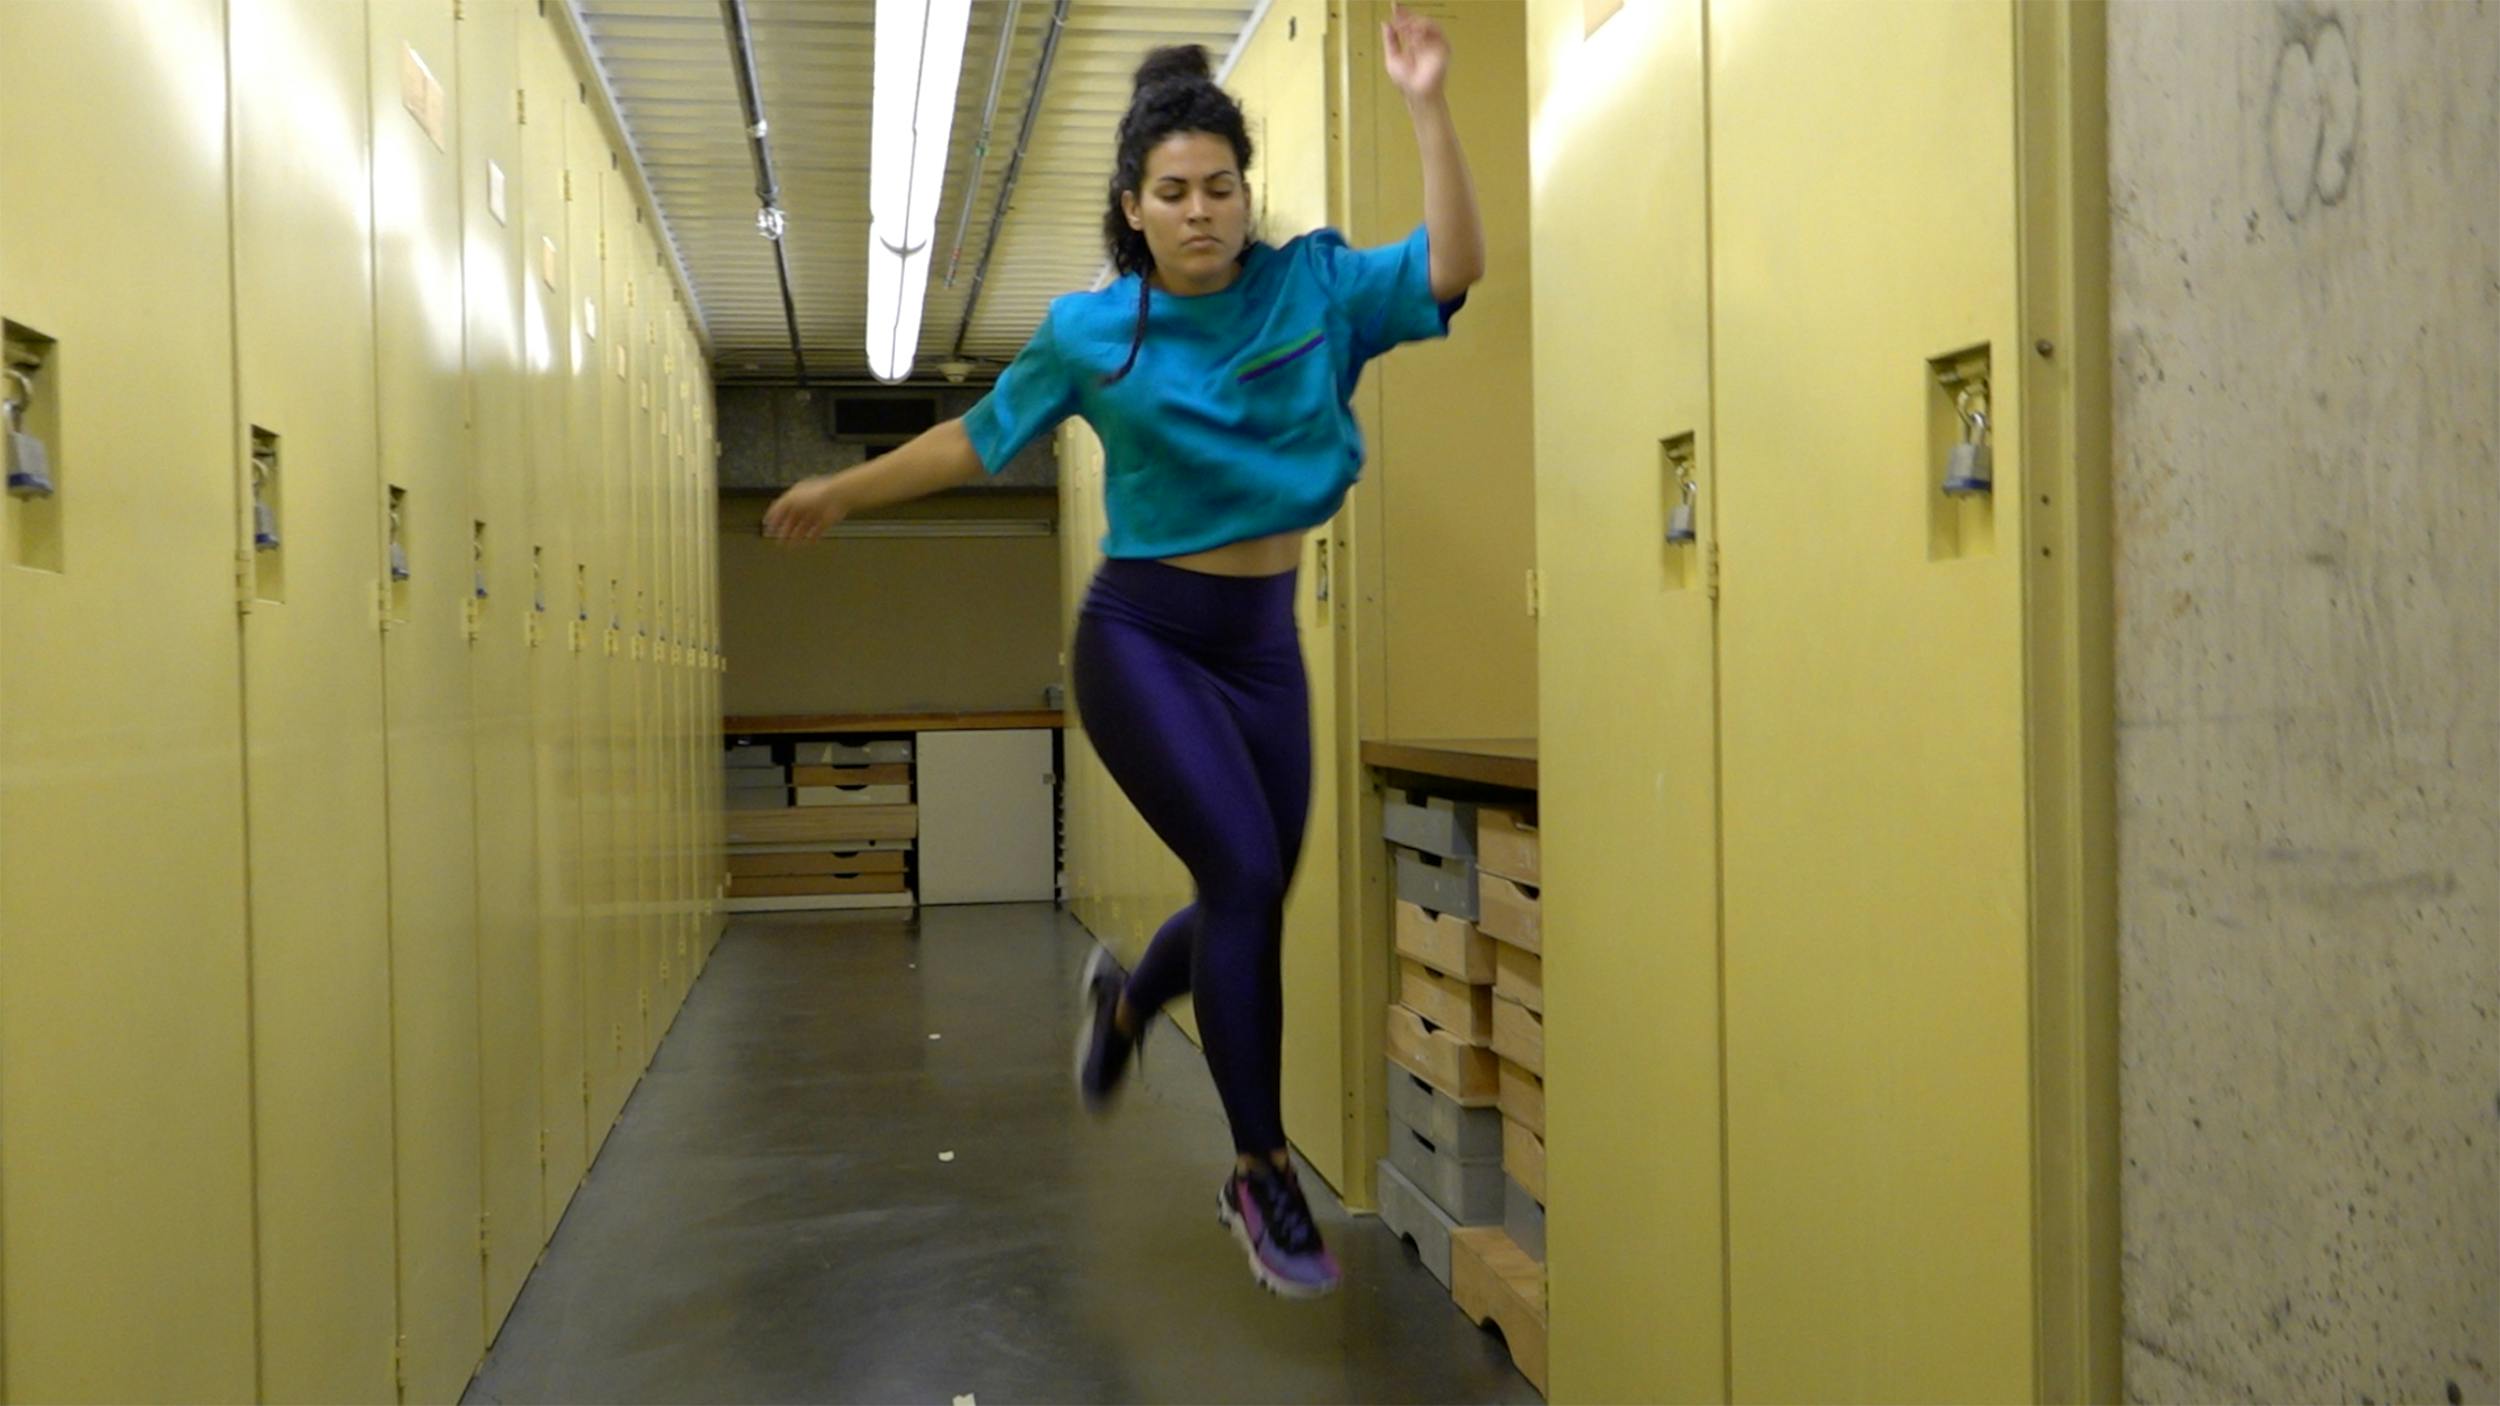 A video still of a dancer in mid-air, performing in a storage space with yellow cabinets lining the walls. She is wearing a blue shirt and purple tights.